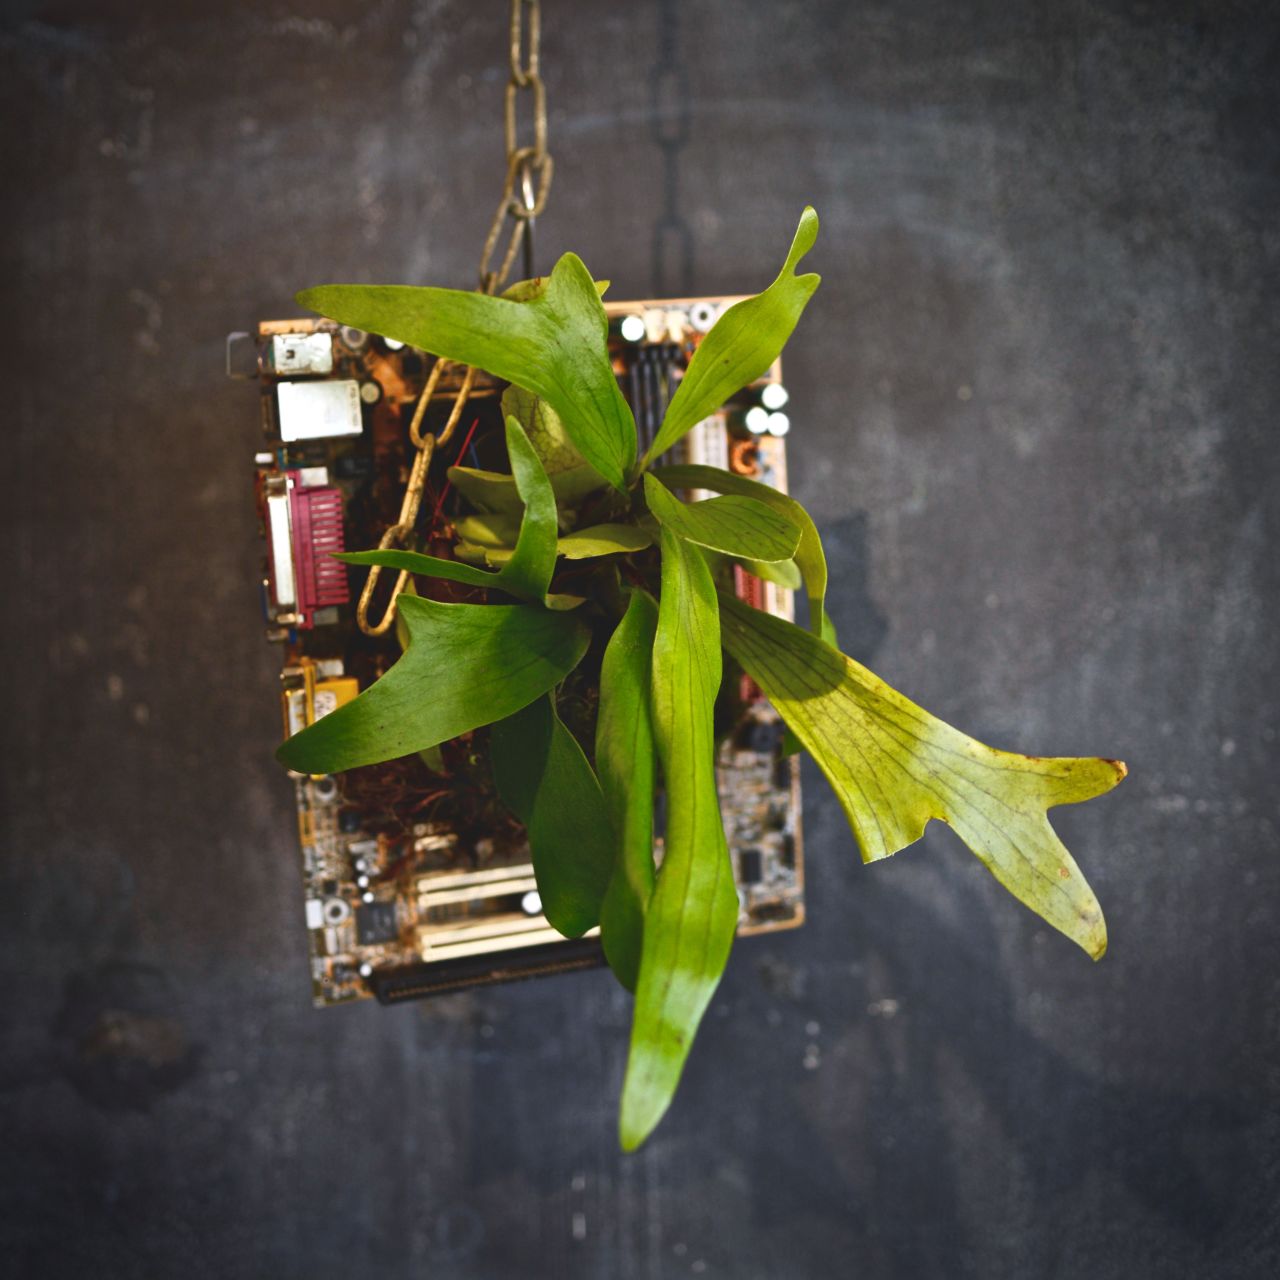 In one of Murase's more unconventional creations, a fern grows out of a discarded circuit board.